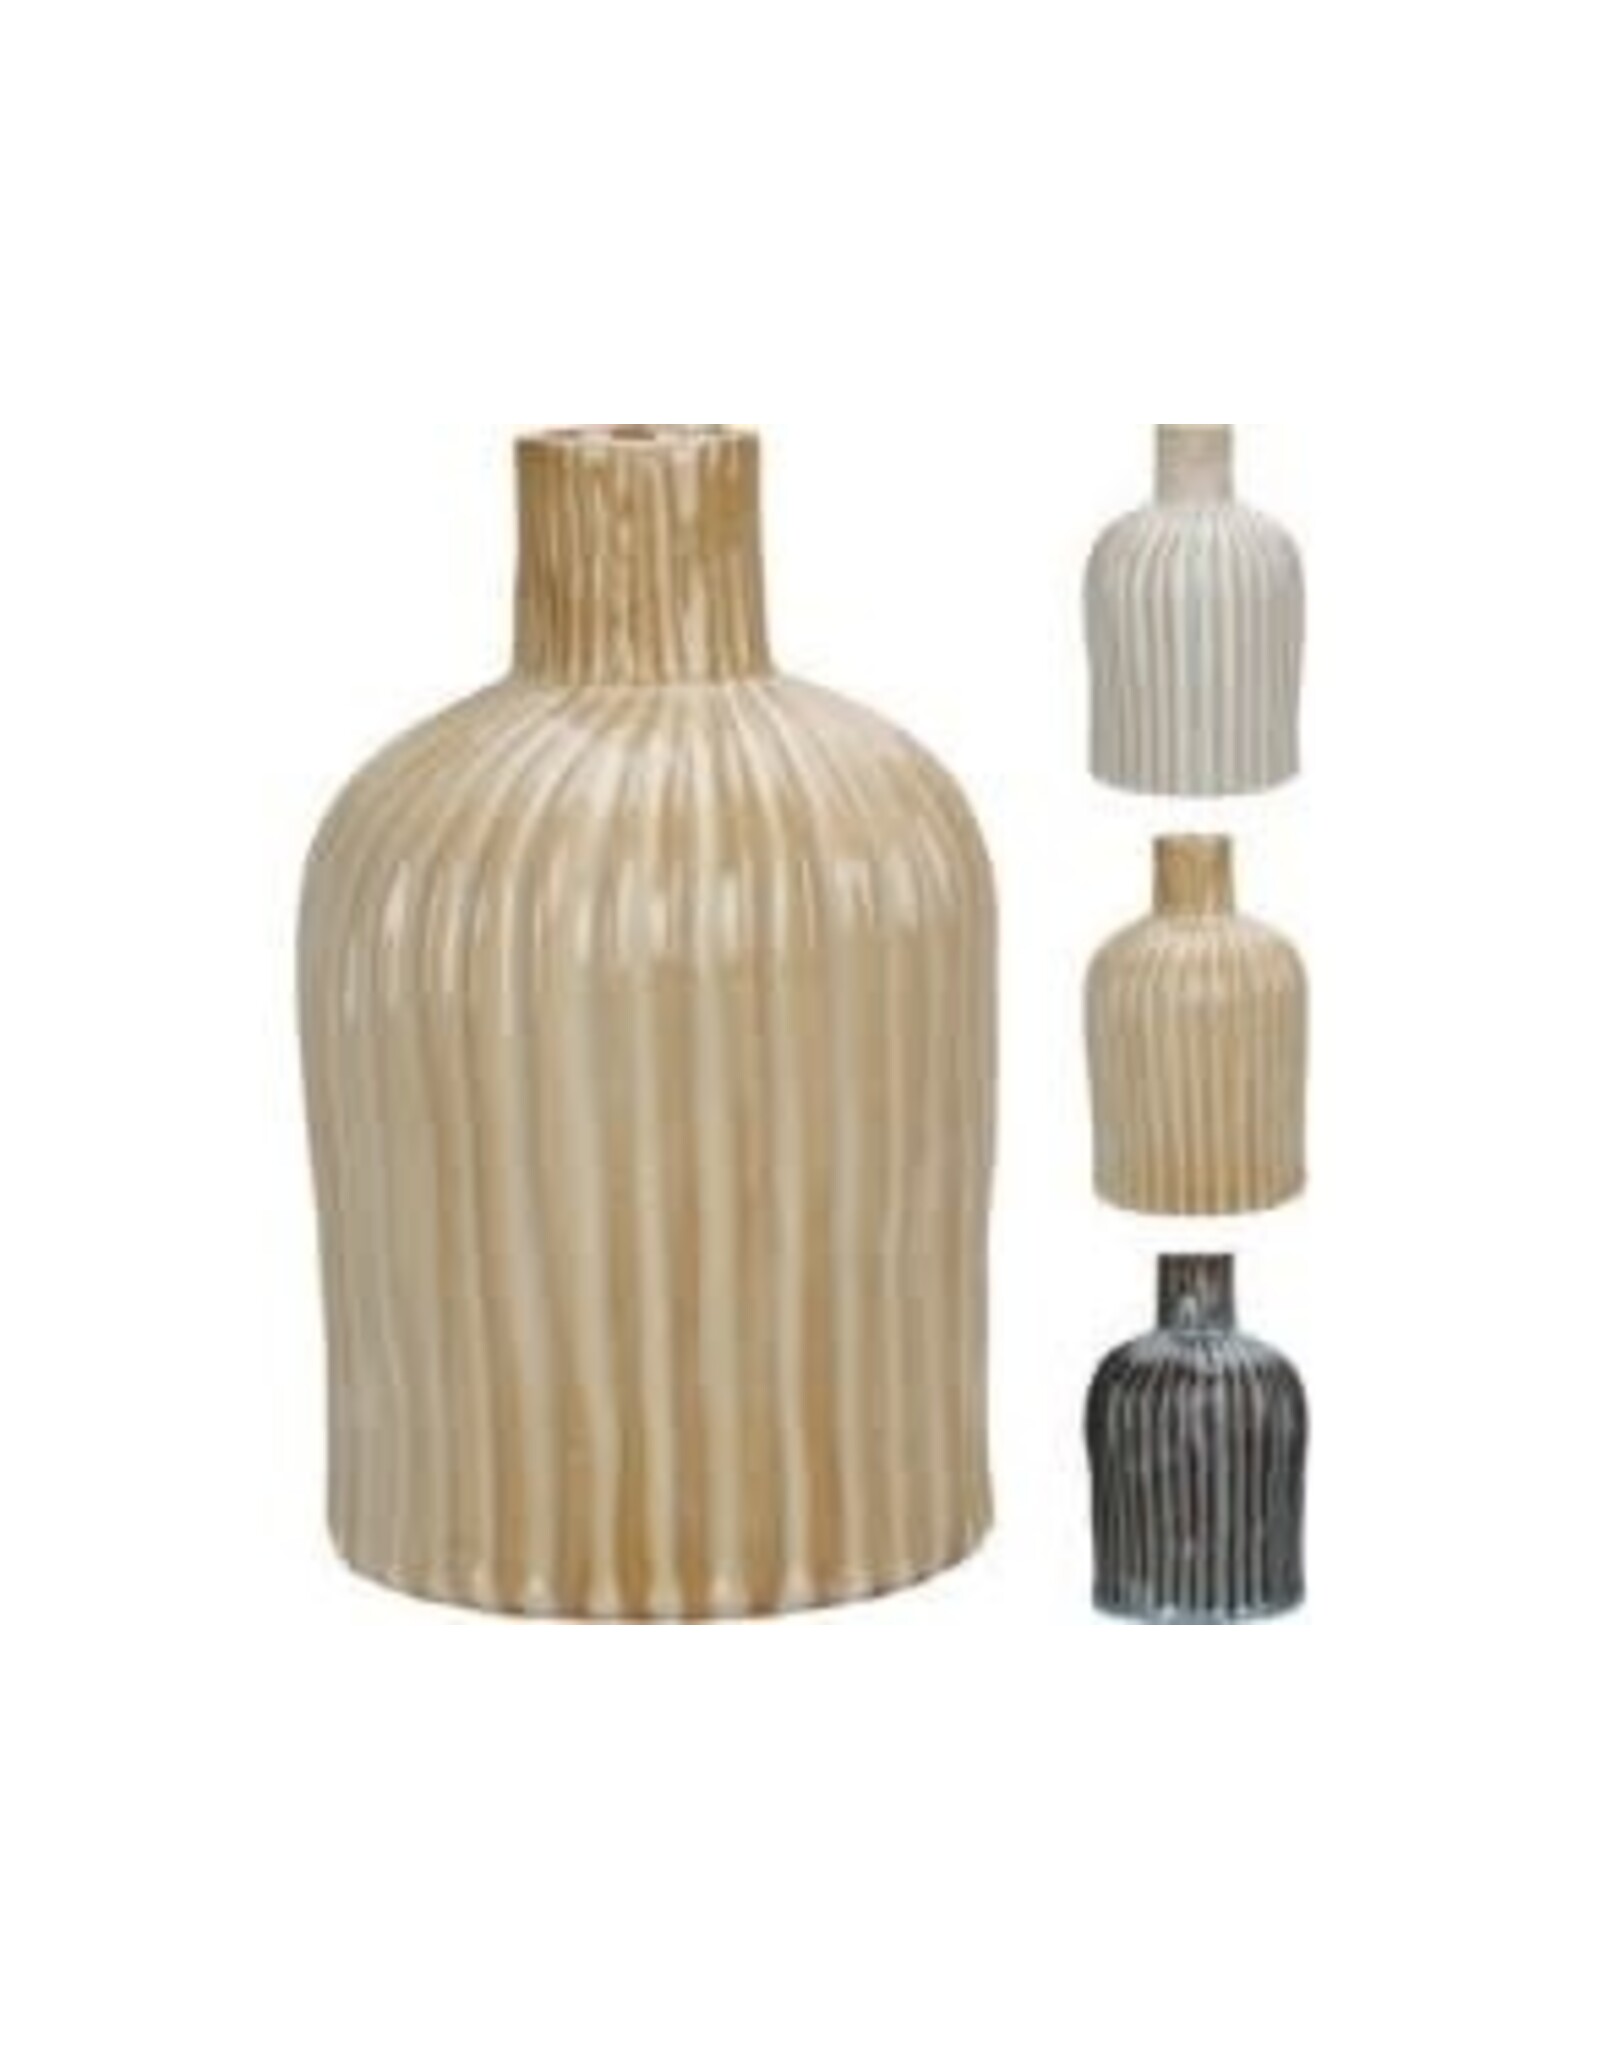 Vase with Stripes 3 asst. APF646690